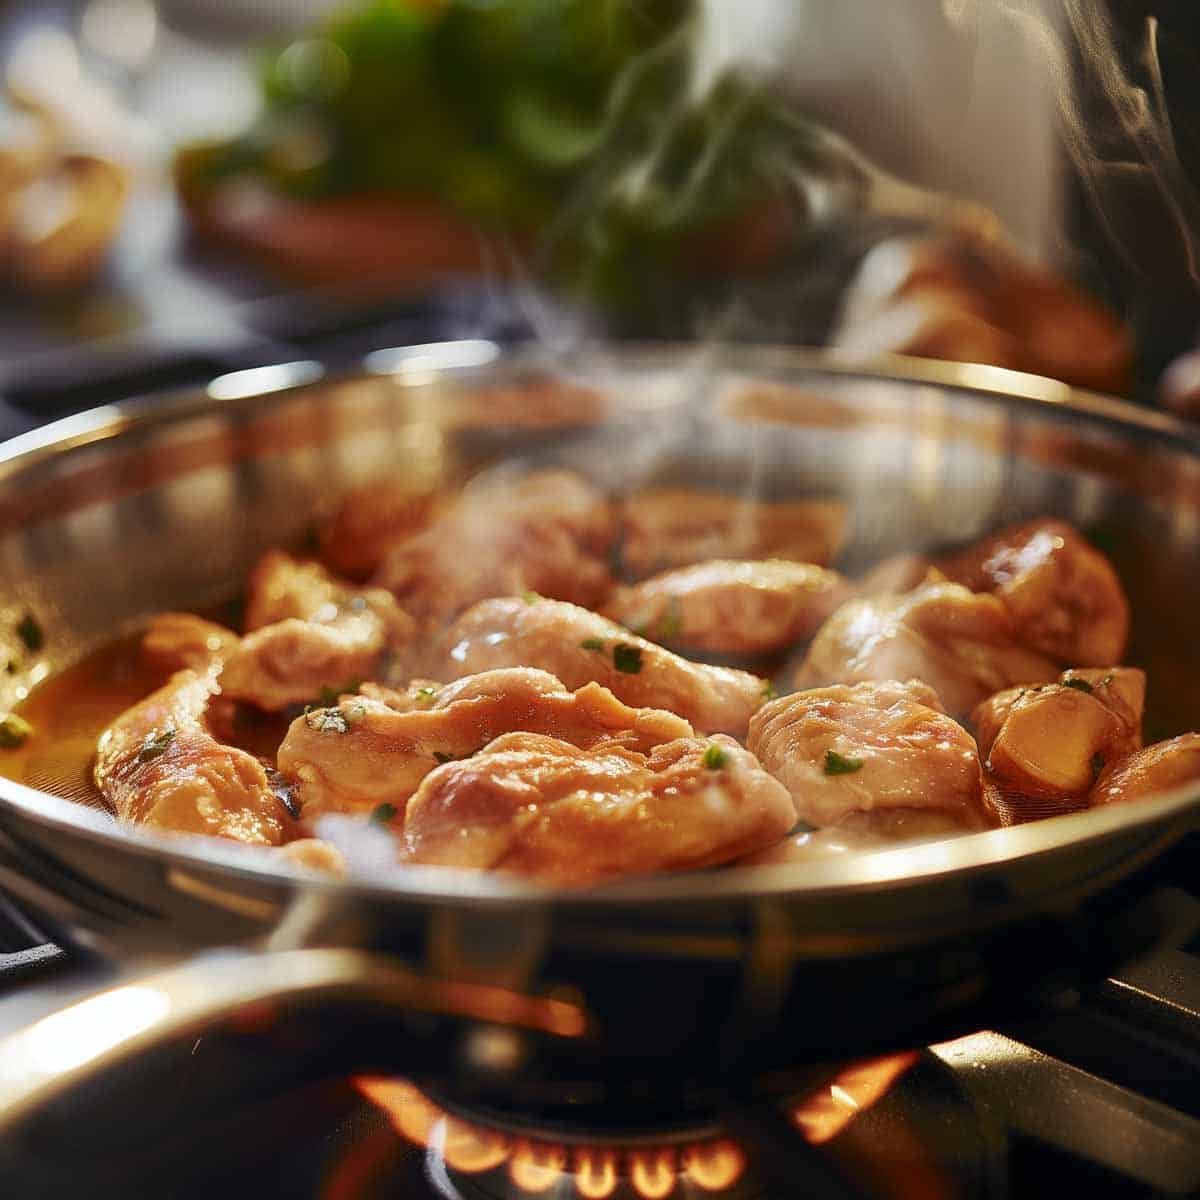 An image capturing chicken pieces being cooked in a stainless steel pan over medium heat. The chicken is turning golden brown as it sizzles, with visible steam rising above it. This cooking process highlights the chicken's transformation as it becomes crispy and flavorful, ready to be added to a variety of dishes.